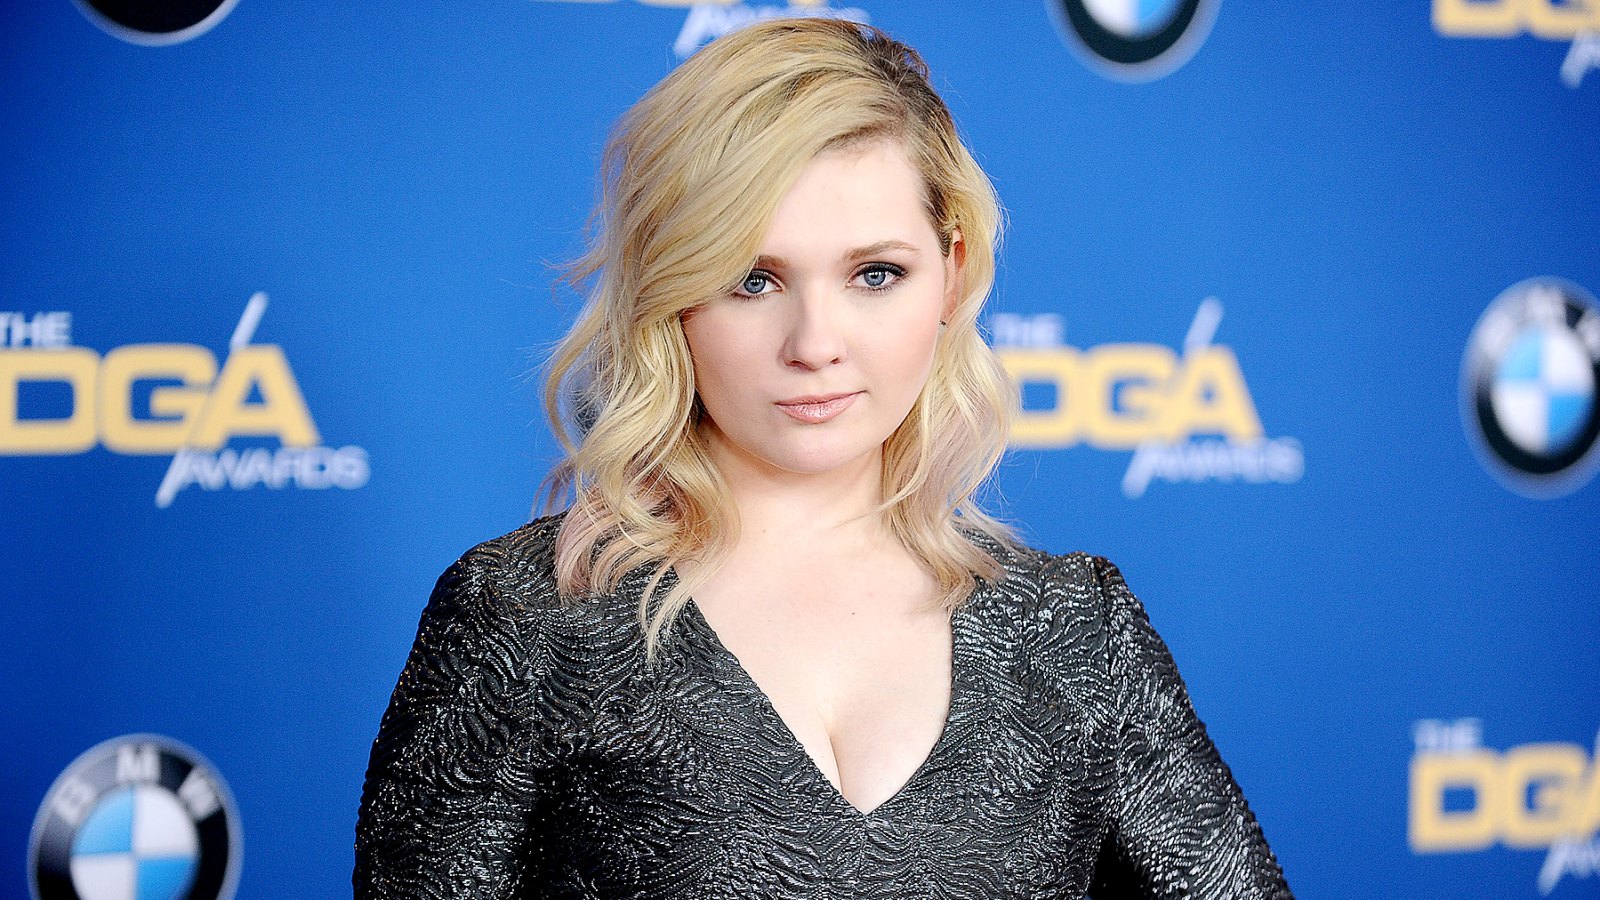 Abigail Breslin attends the 68th annual Directors Guild of America Awards at the Hyatt Regency Century Plaza on February 6, 2016 in Los Angeles, California.